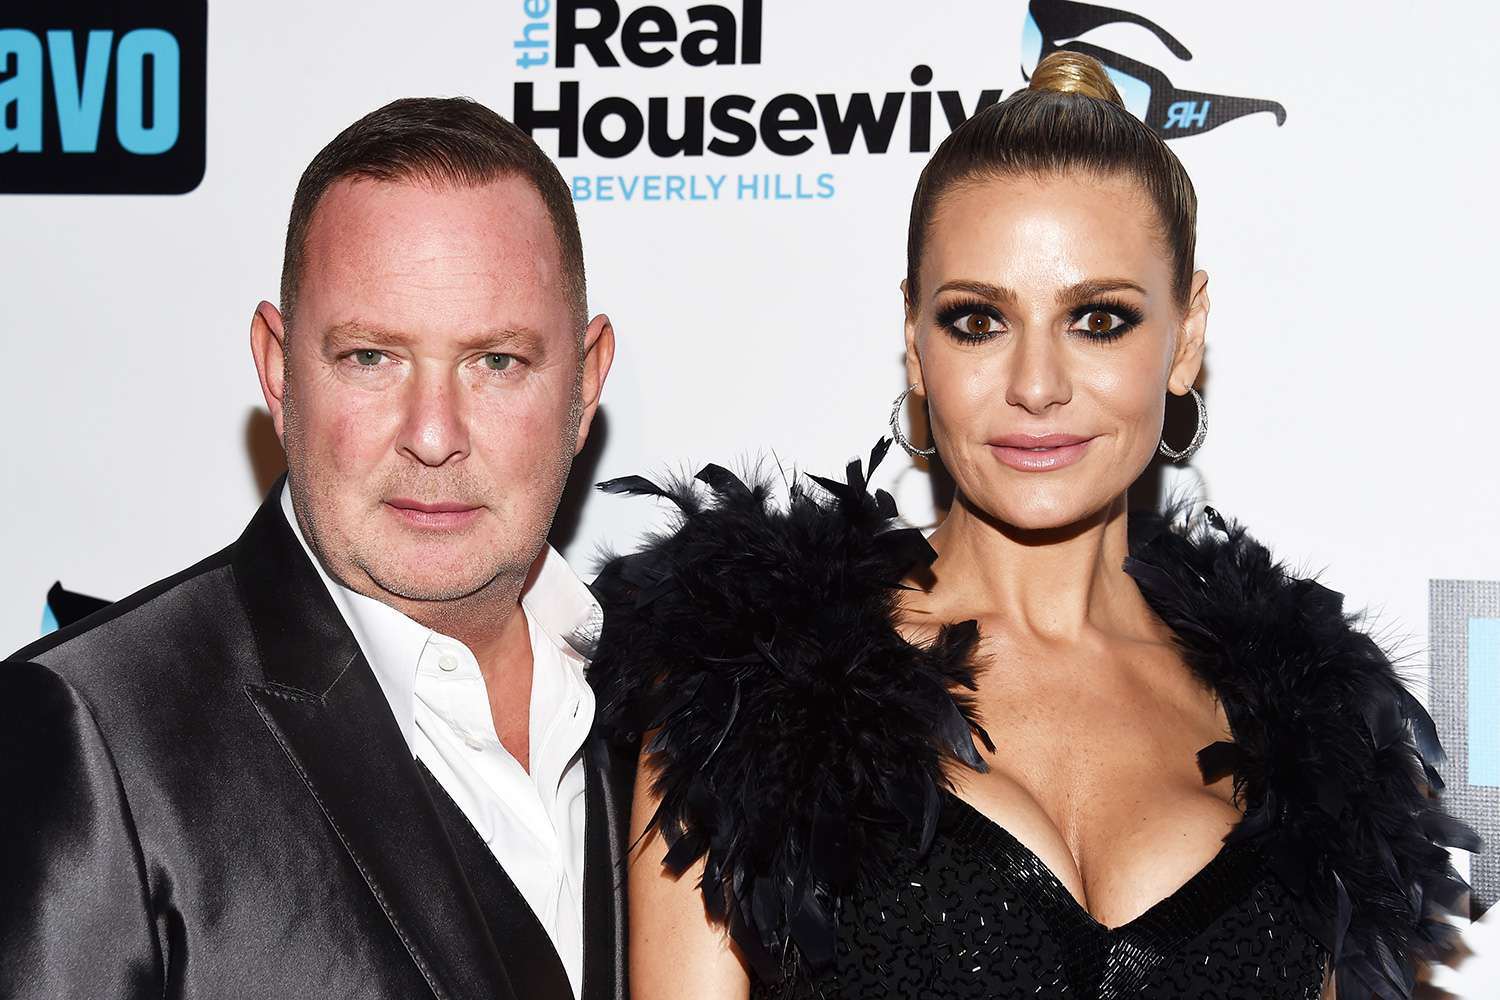 “RHOBH”'s Dorit Kemsley Is Taking Separation from Husband Paul 'PK' Kemsley 'One Day at a Time'